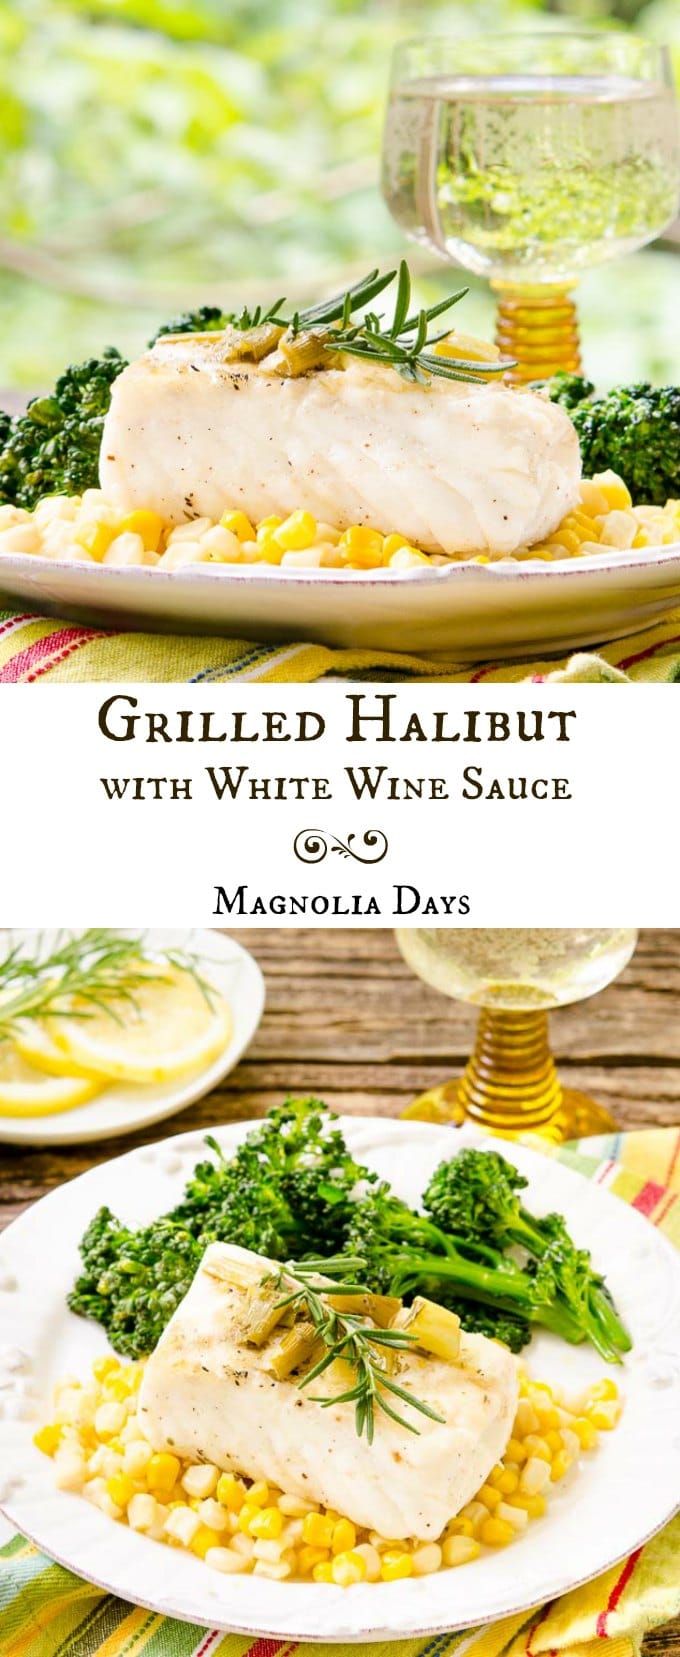 Grilled Halibut with White Wine Sauce has flavors of green onion, rosemary, lemon, and butter. It a delightful seafood dish to brighten up any day.